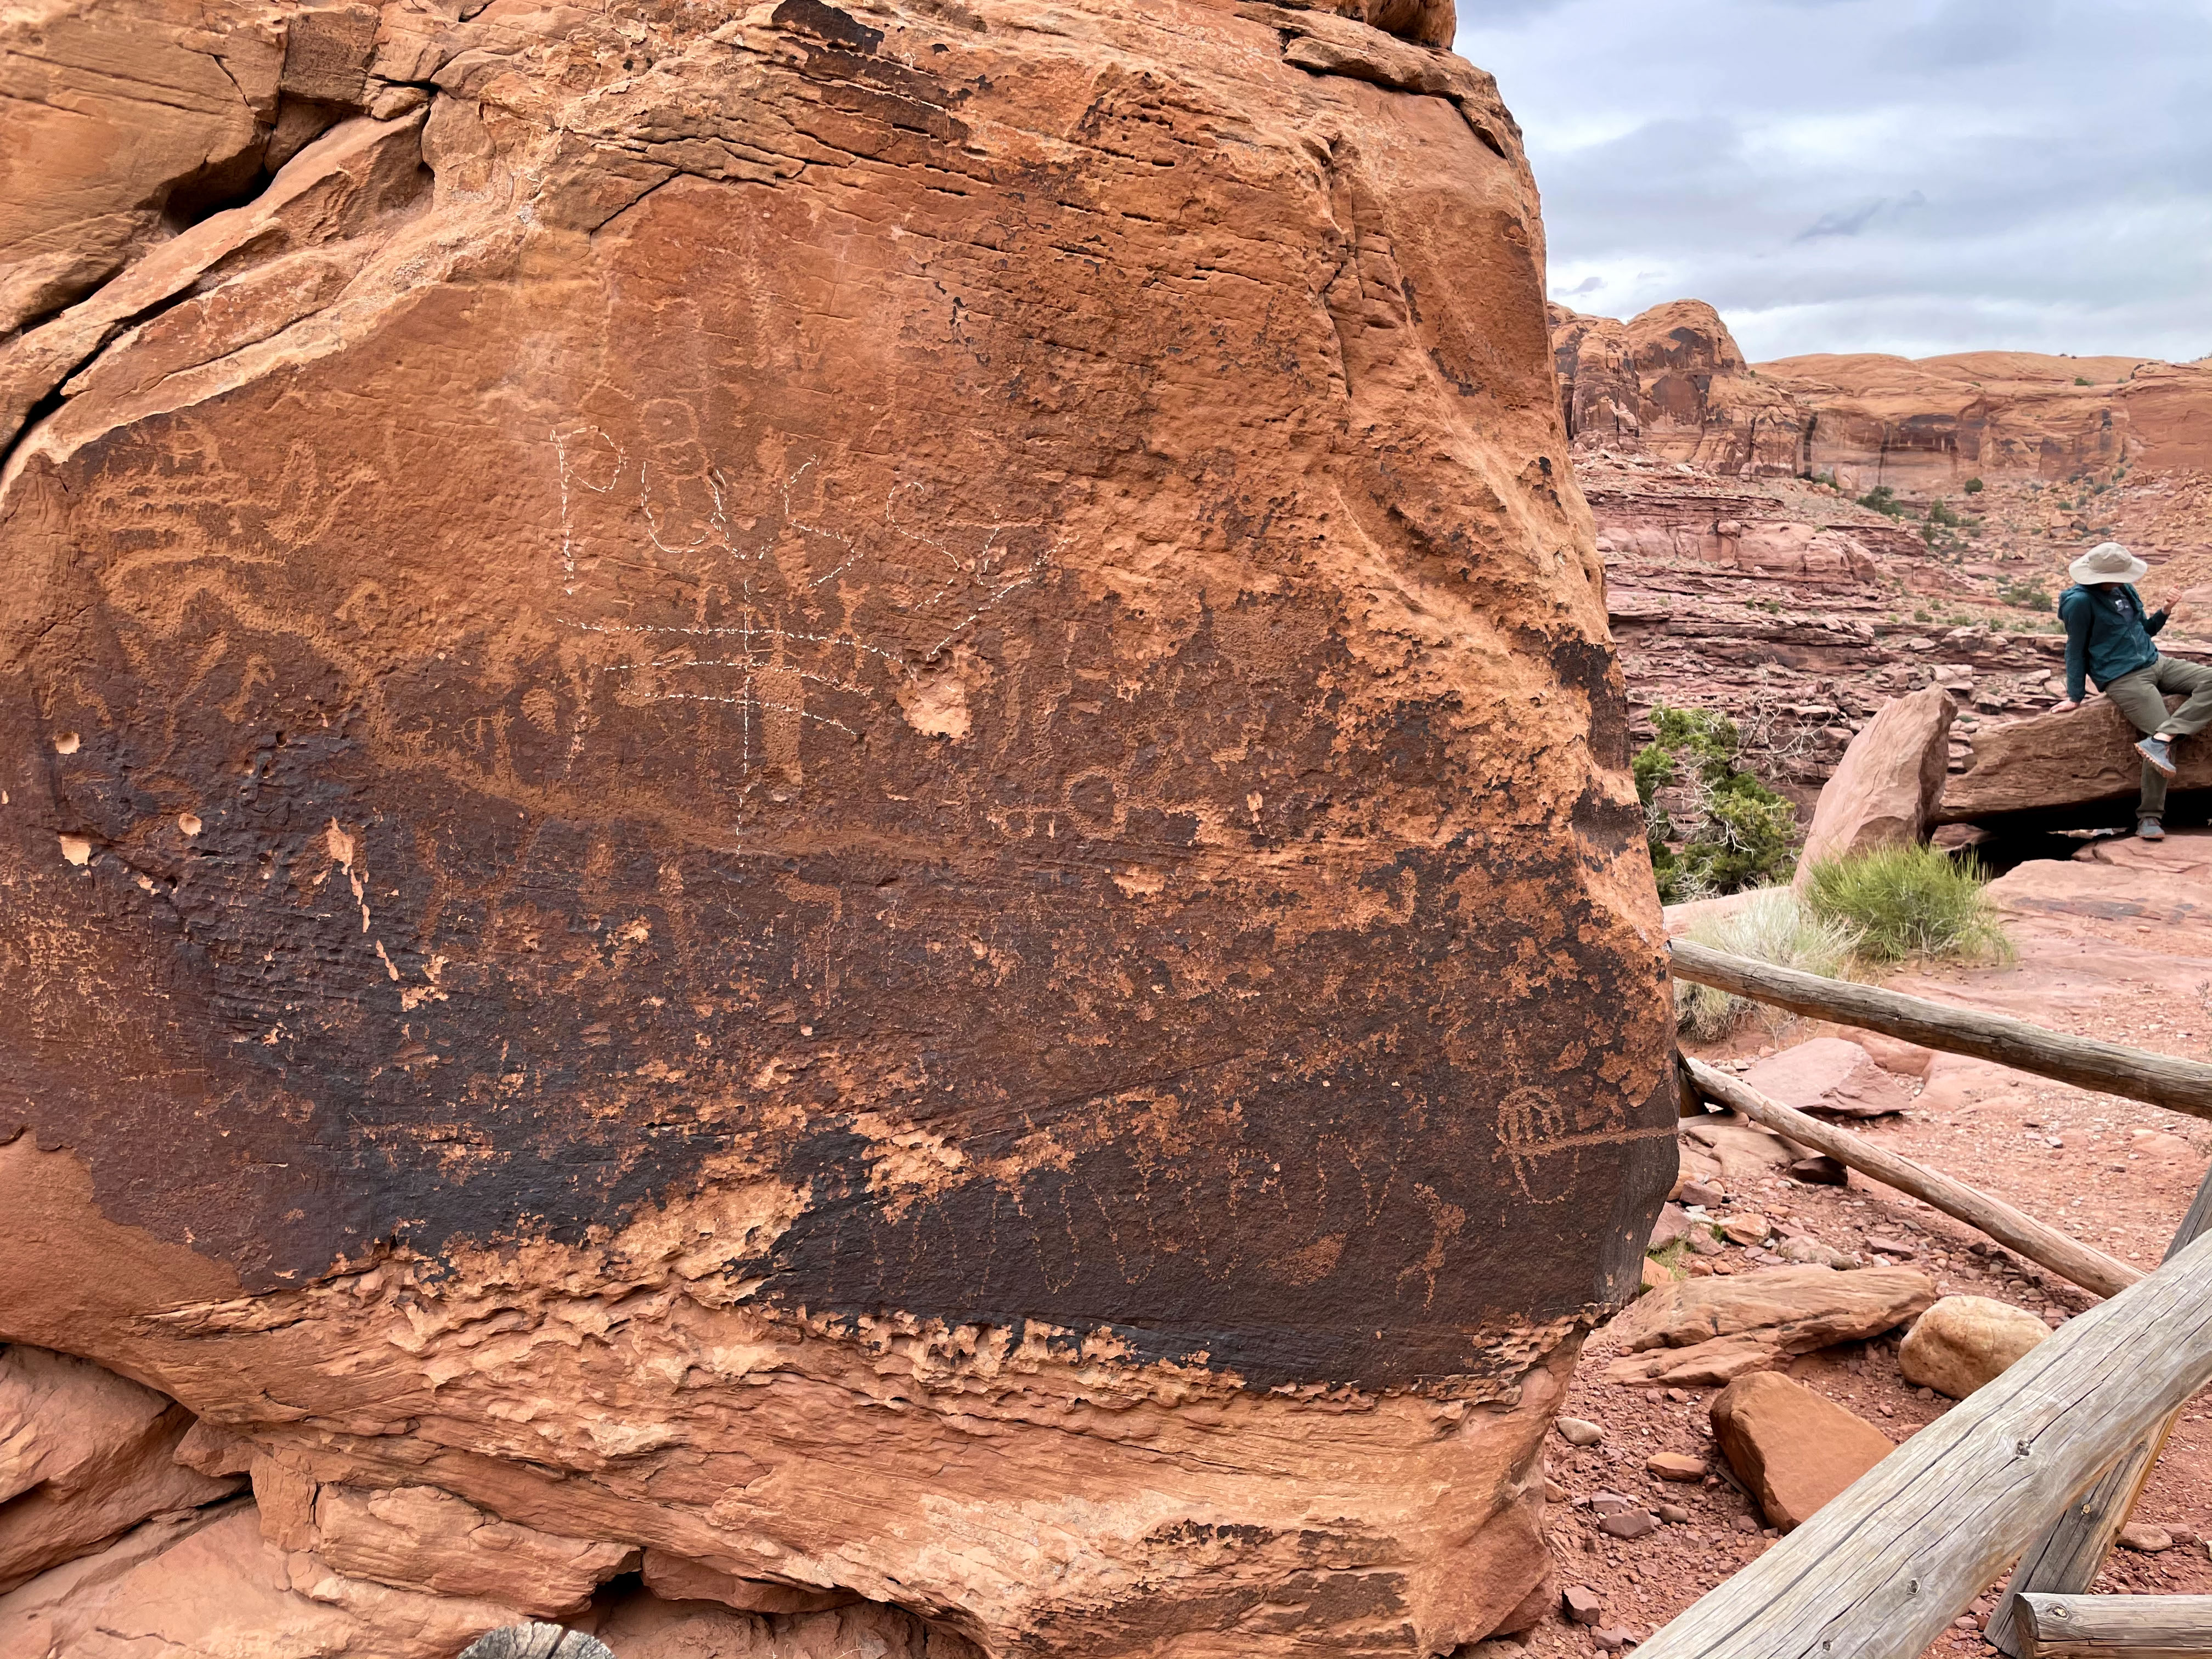 the word "pussy" is drawn apparently in white chalk over one of the panels on Birthing Rock.